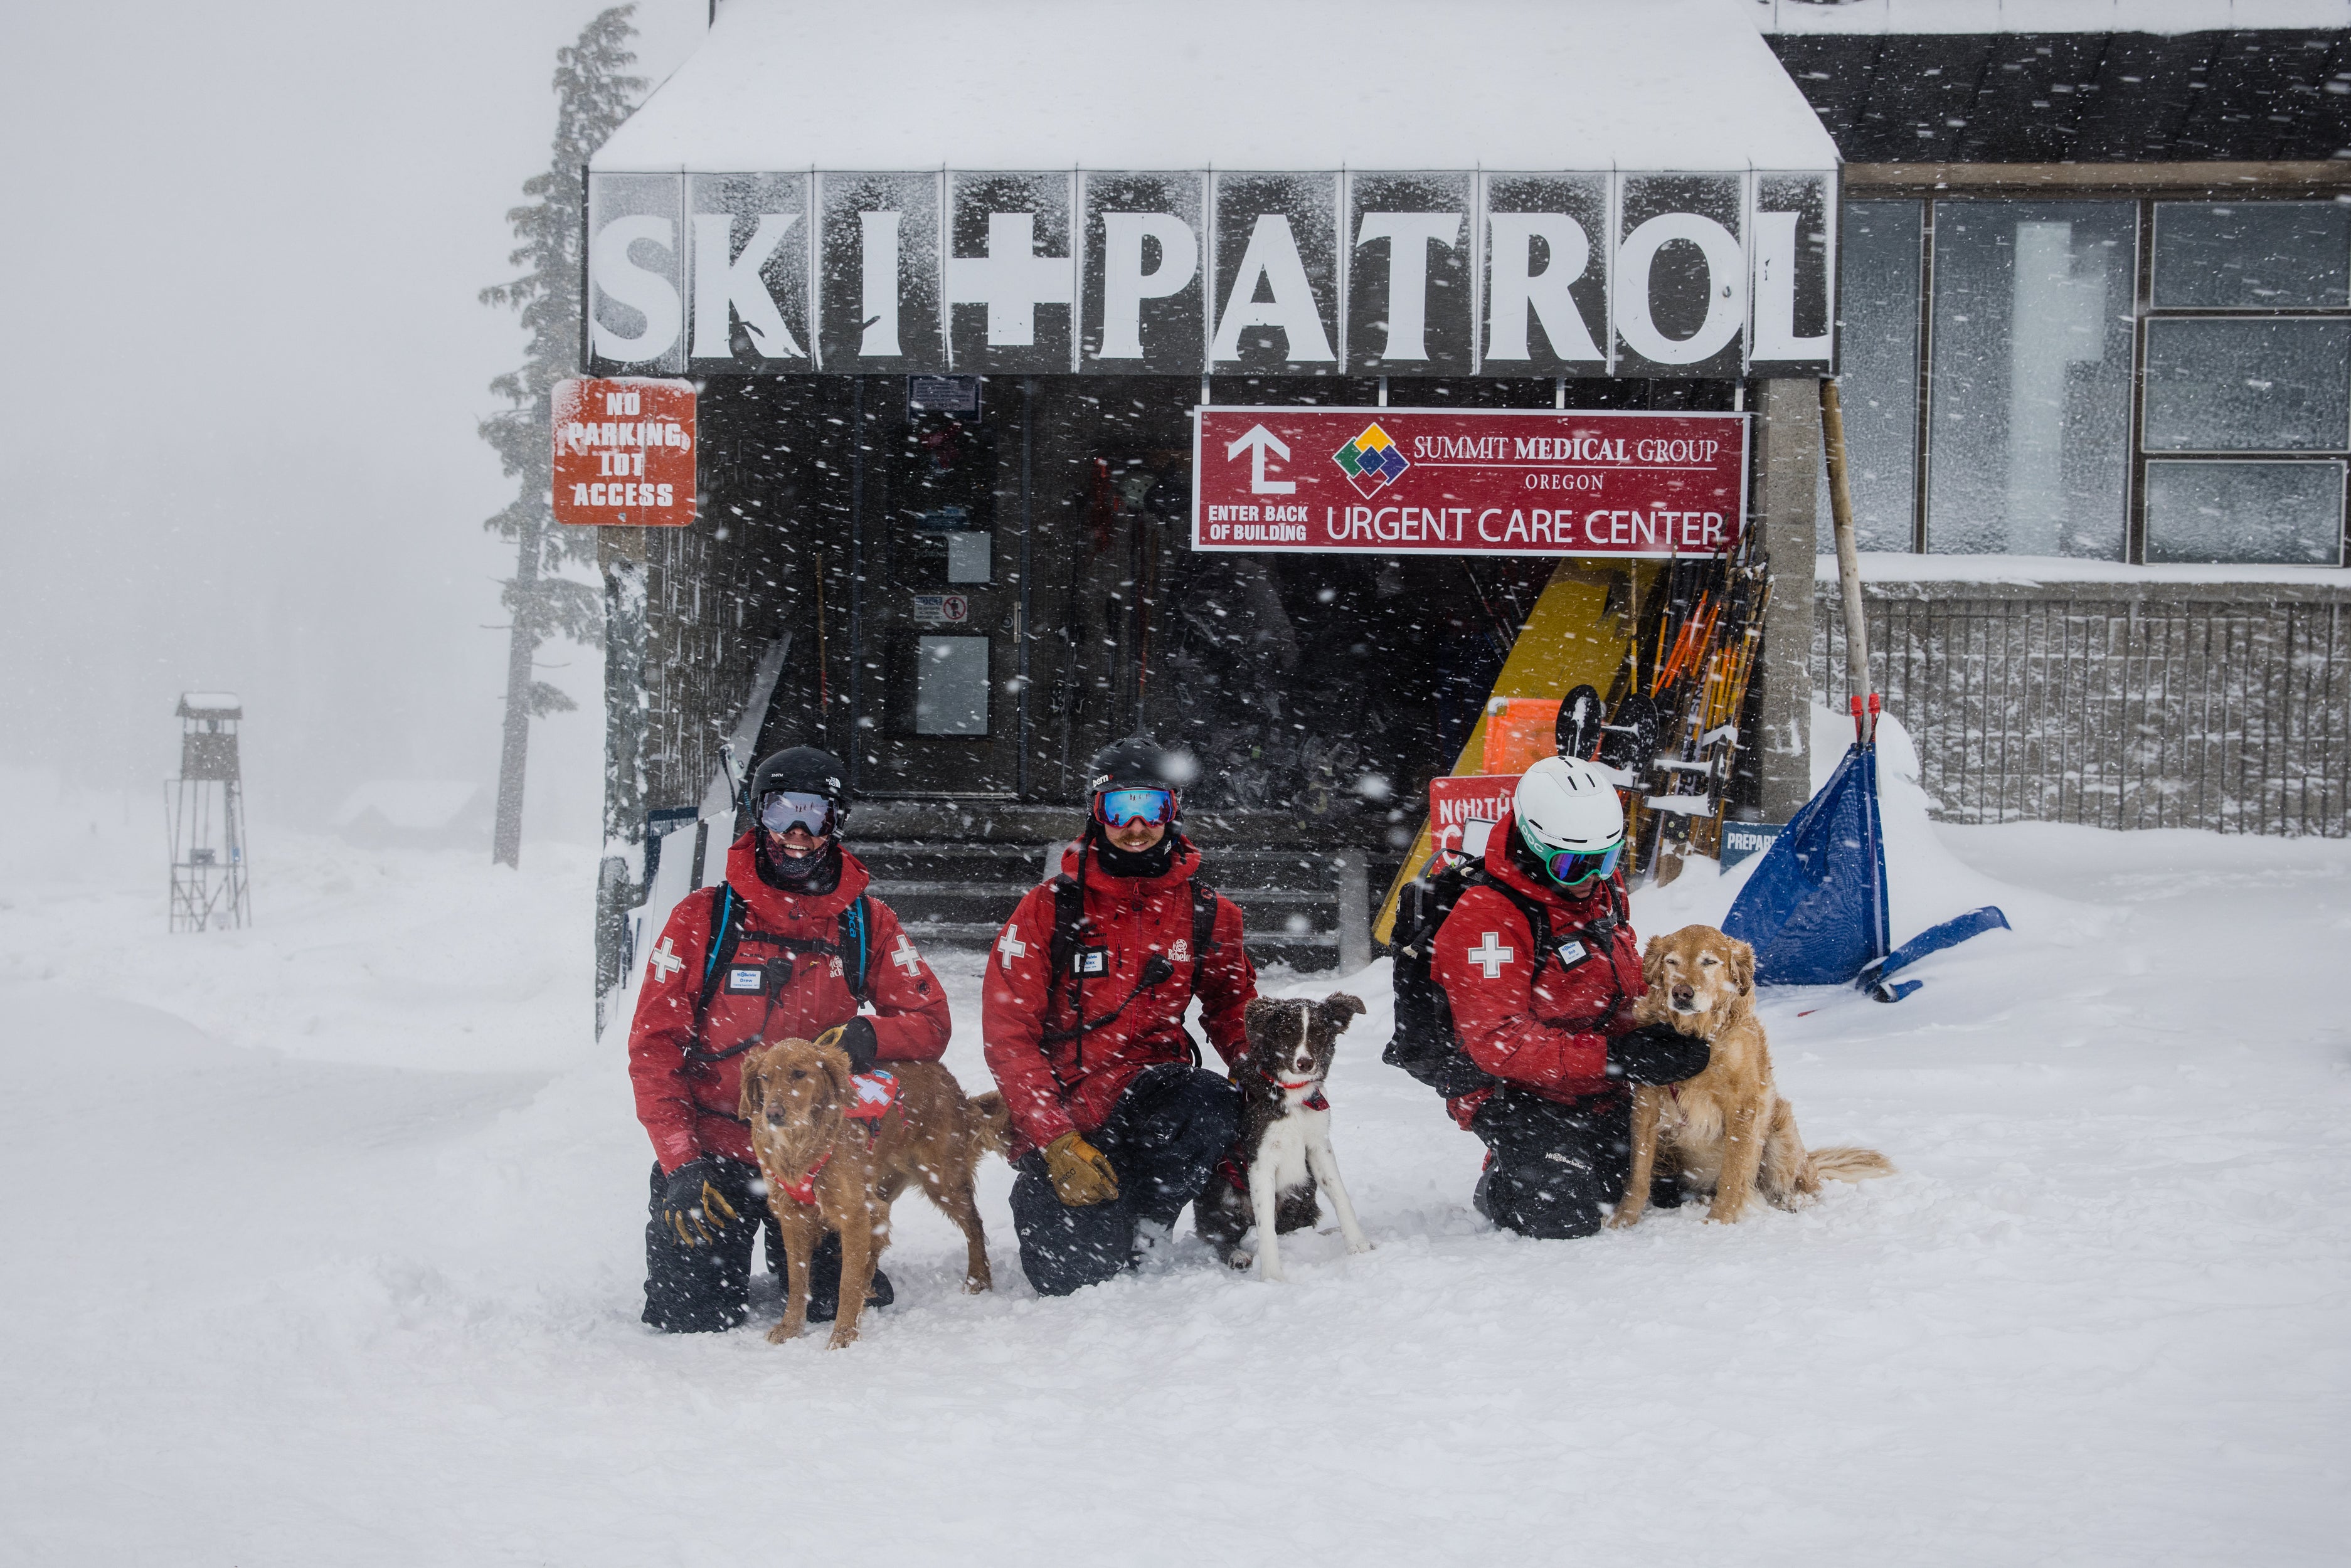 Three ski patrollers pose outside the Ski Patrol Room with their avalanche dogs.